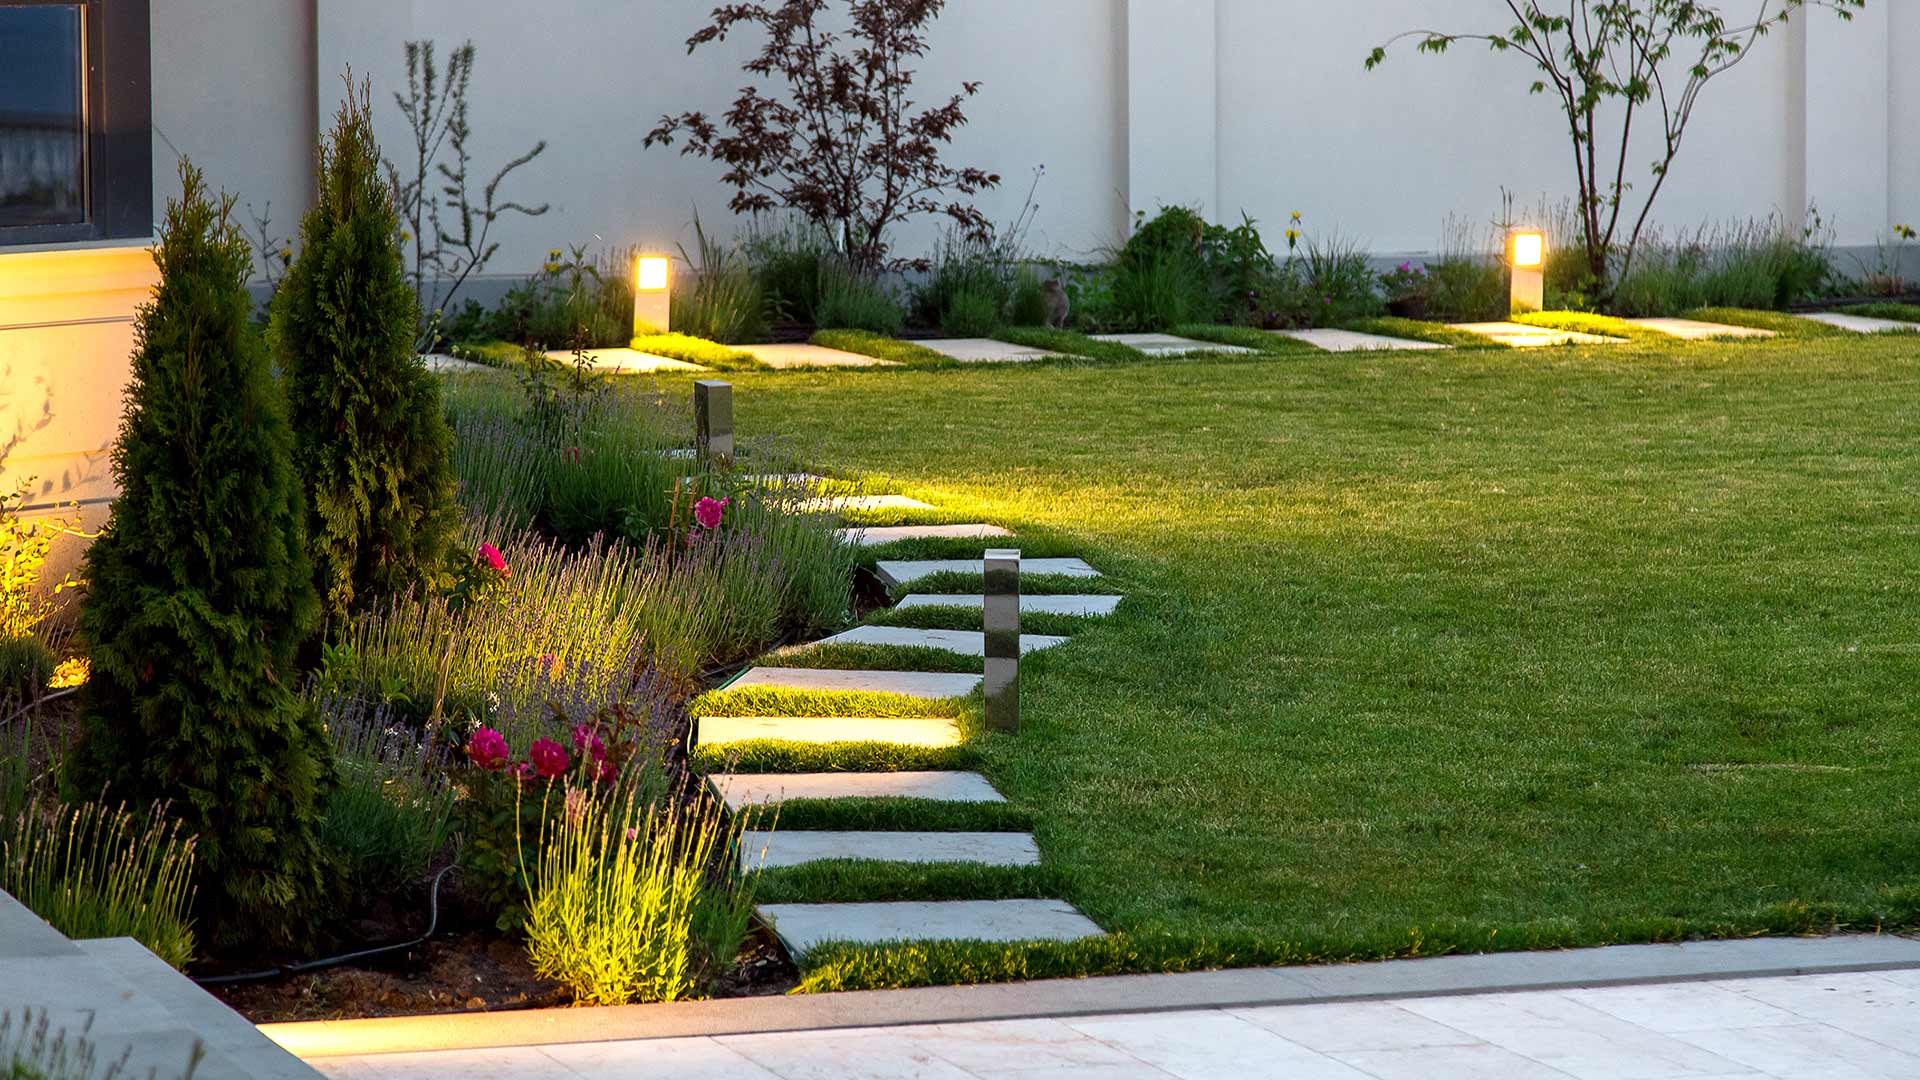 Outdoor Lighting Can Increase the Beauty & Safety of Your Property